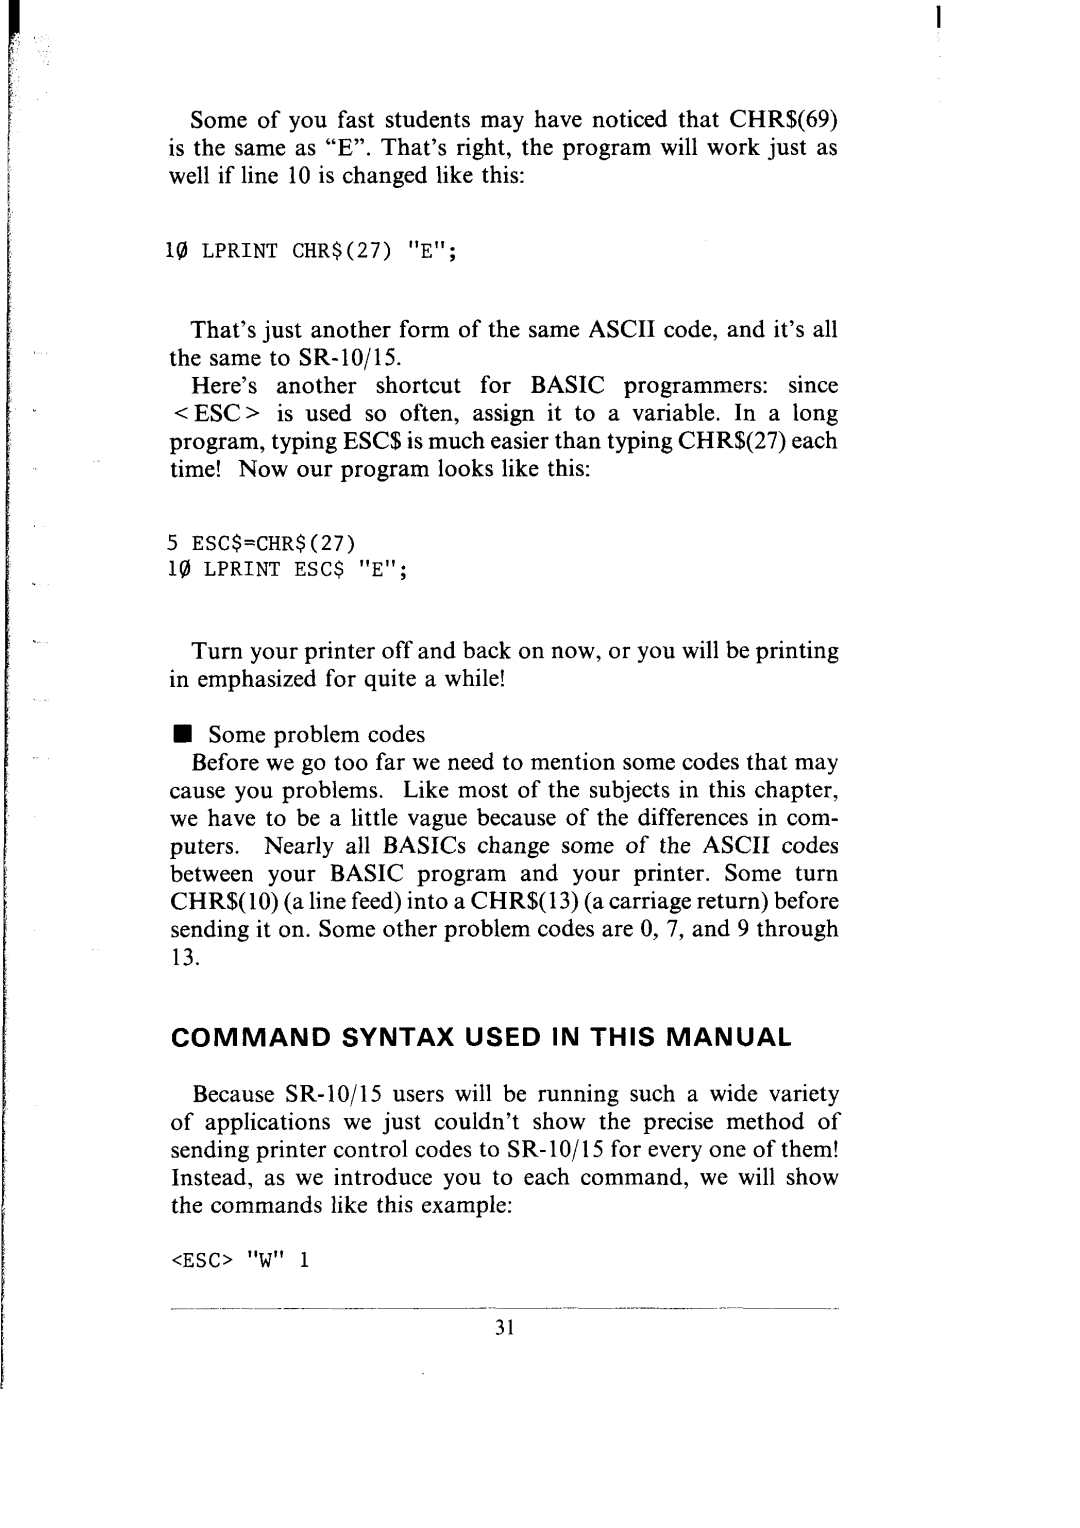 Star Micronics SR-10/I5 user manual Command Syntax Used In This Manual 